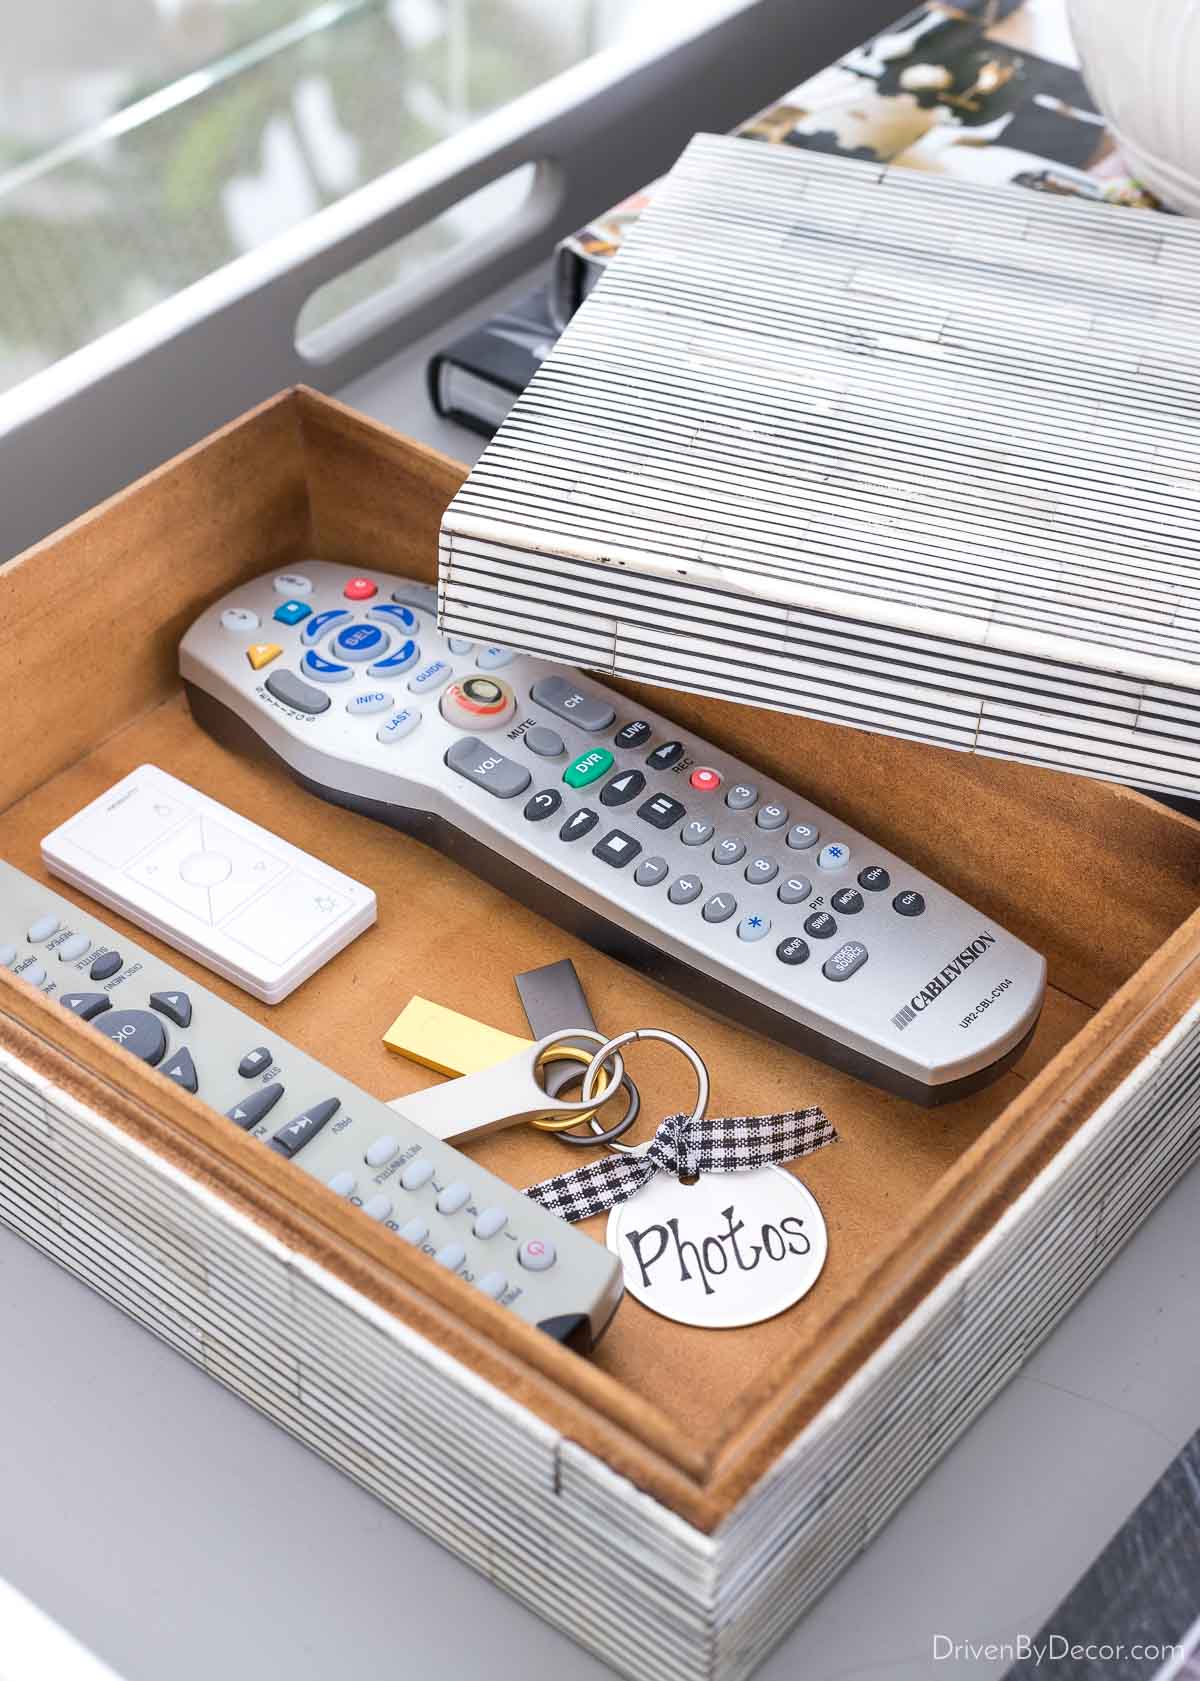 Decorative box holding remotes on living room coffee table